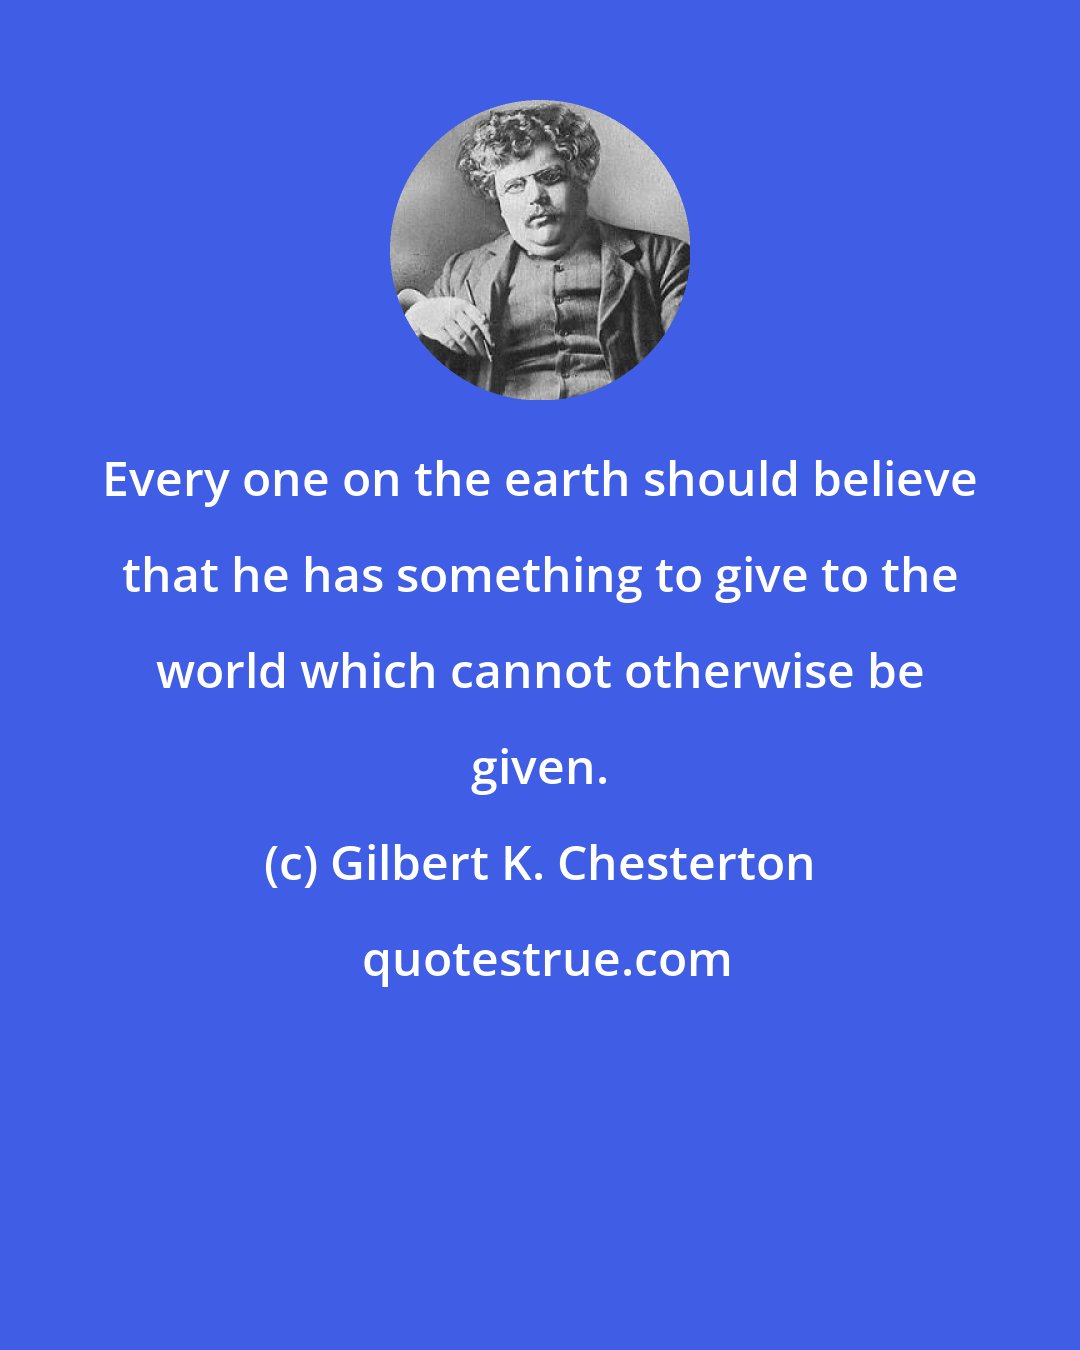 Gilbert K. Chesterton: Every one on the earth should believe that he has something to give to the world which cannot otherwise be given.